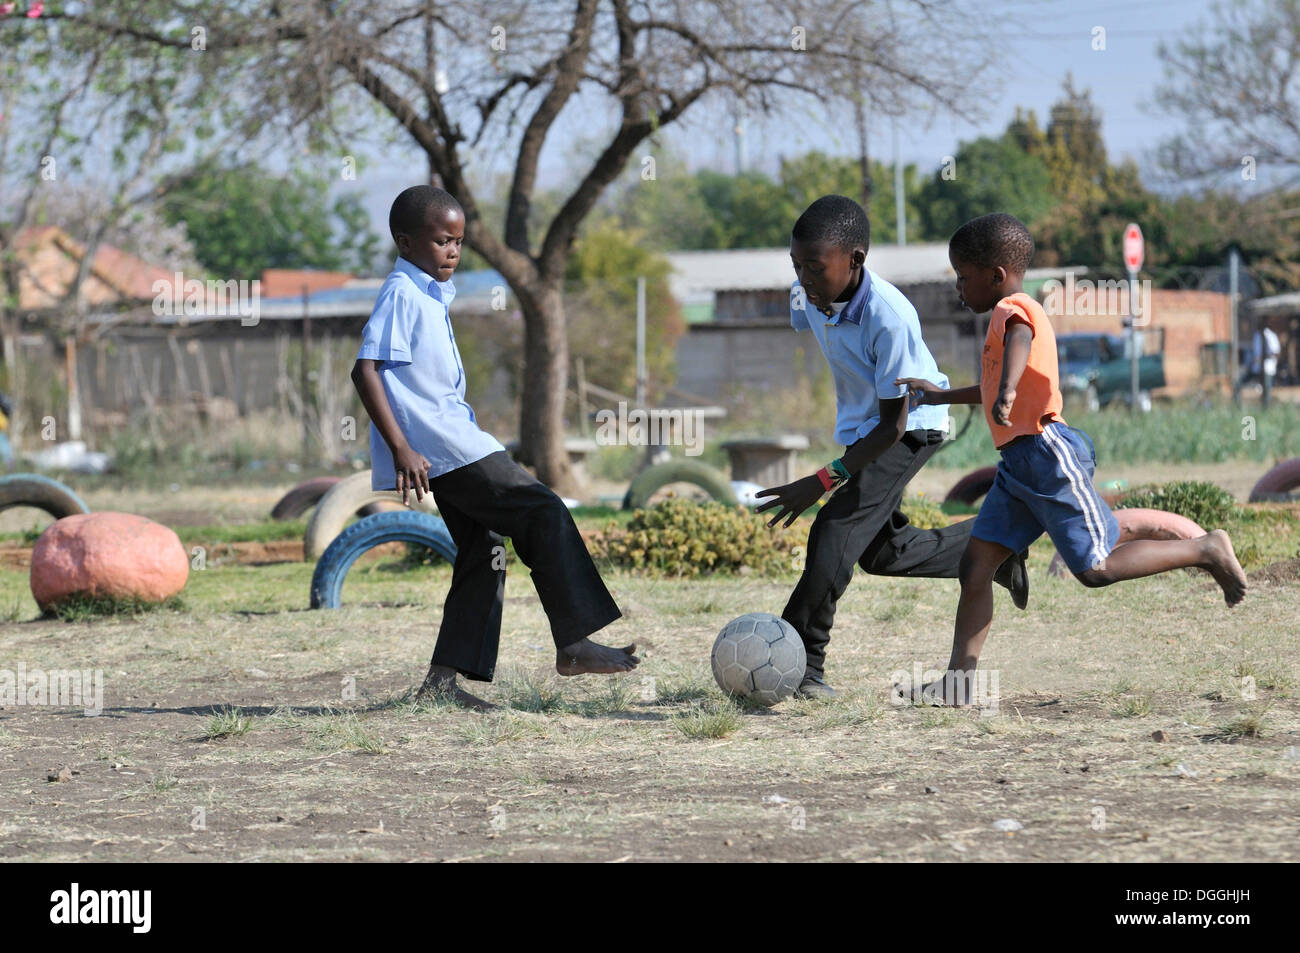 Three boys playing football, Cape Town, South Africa, Africa Stock Photo